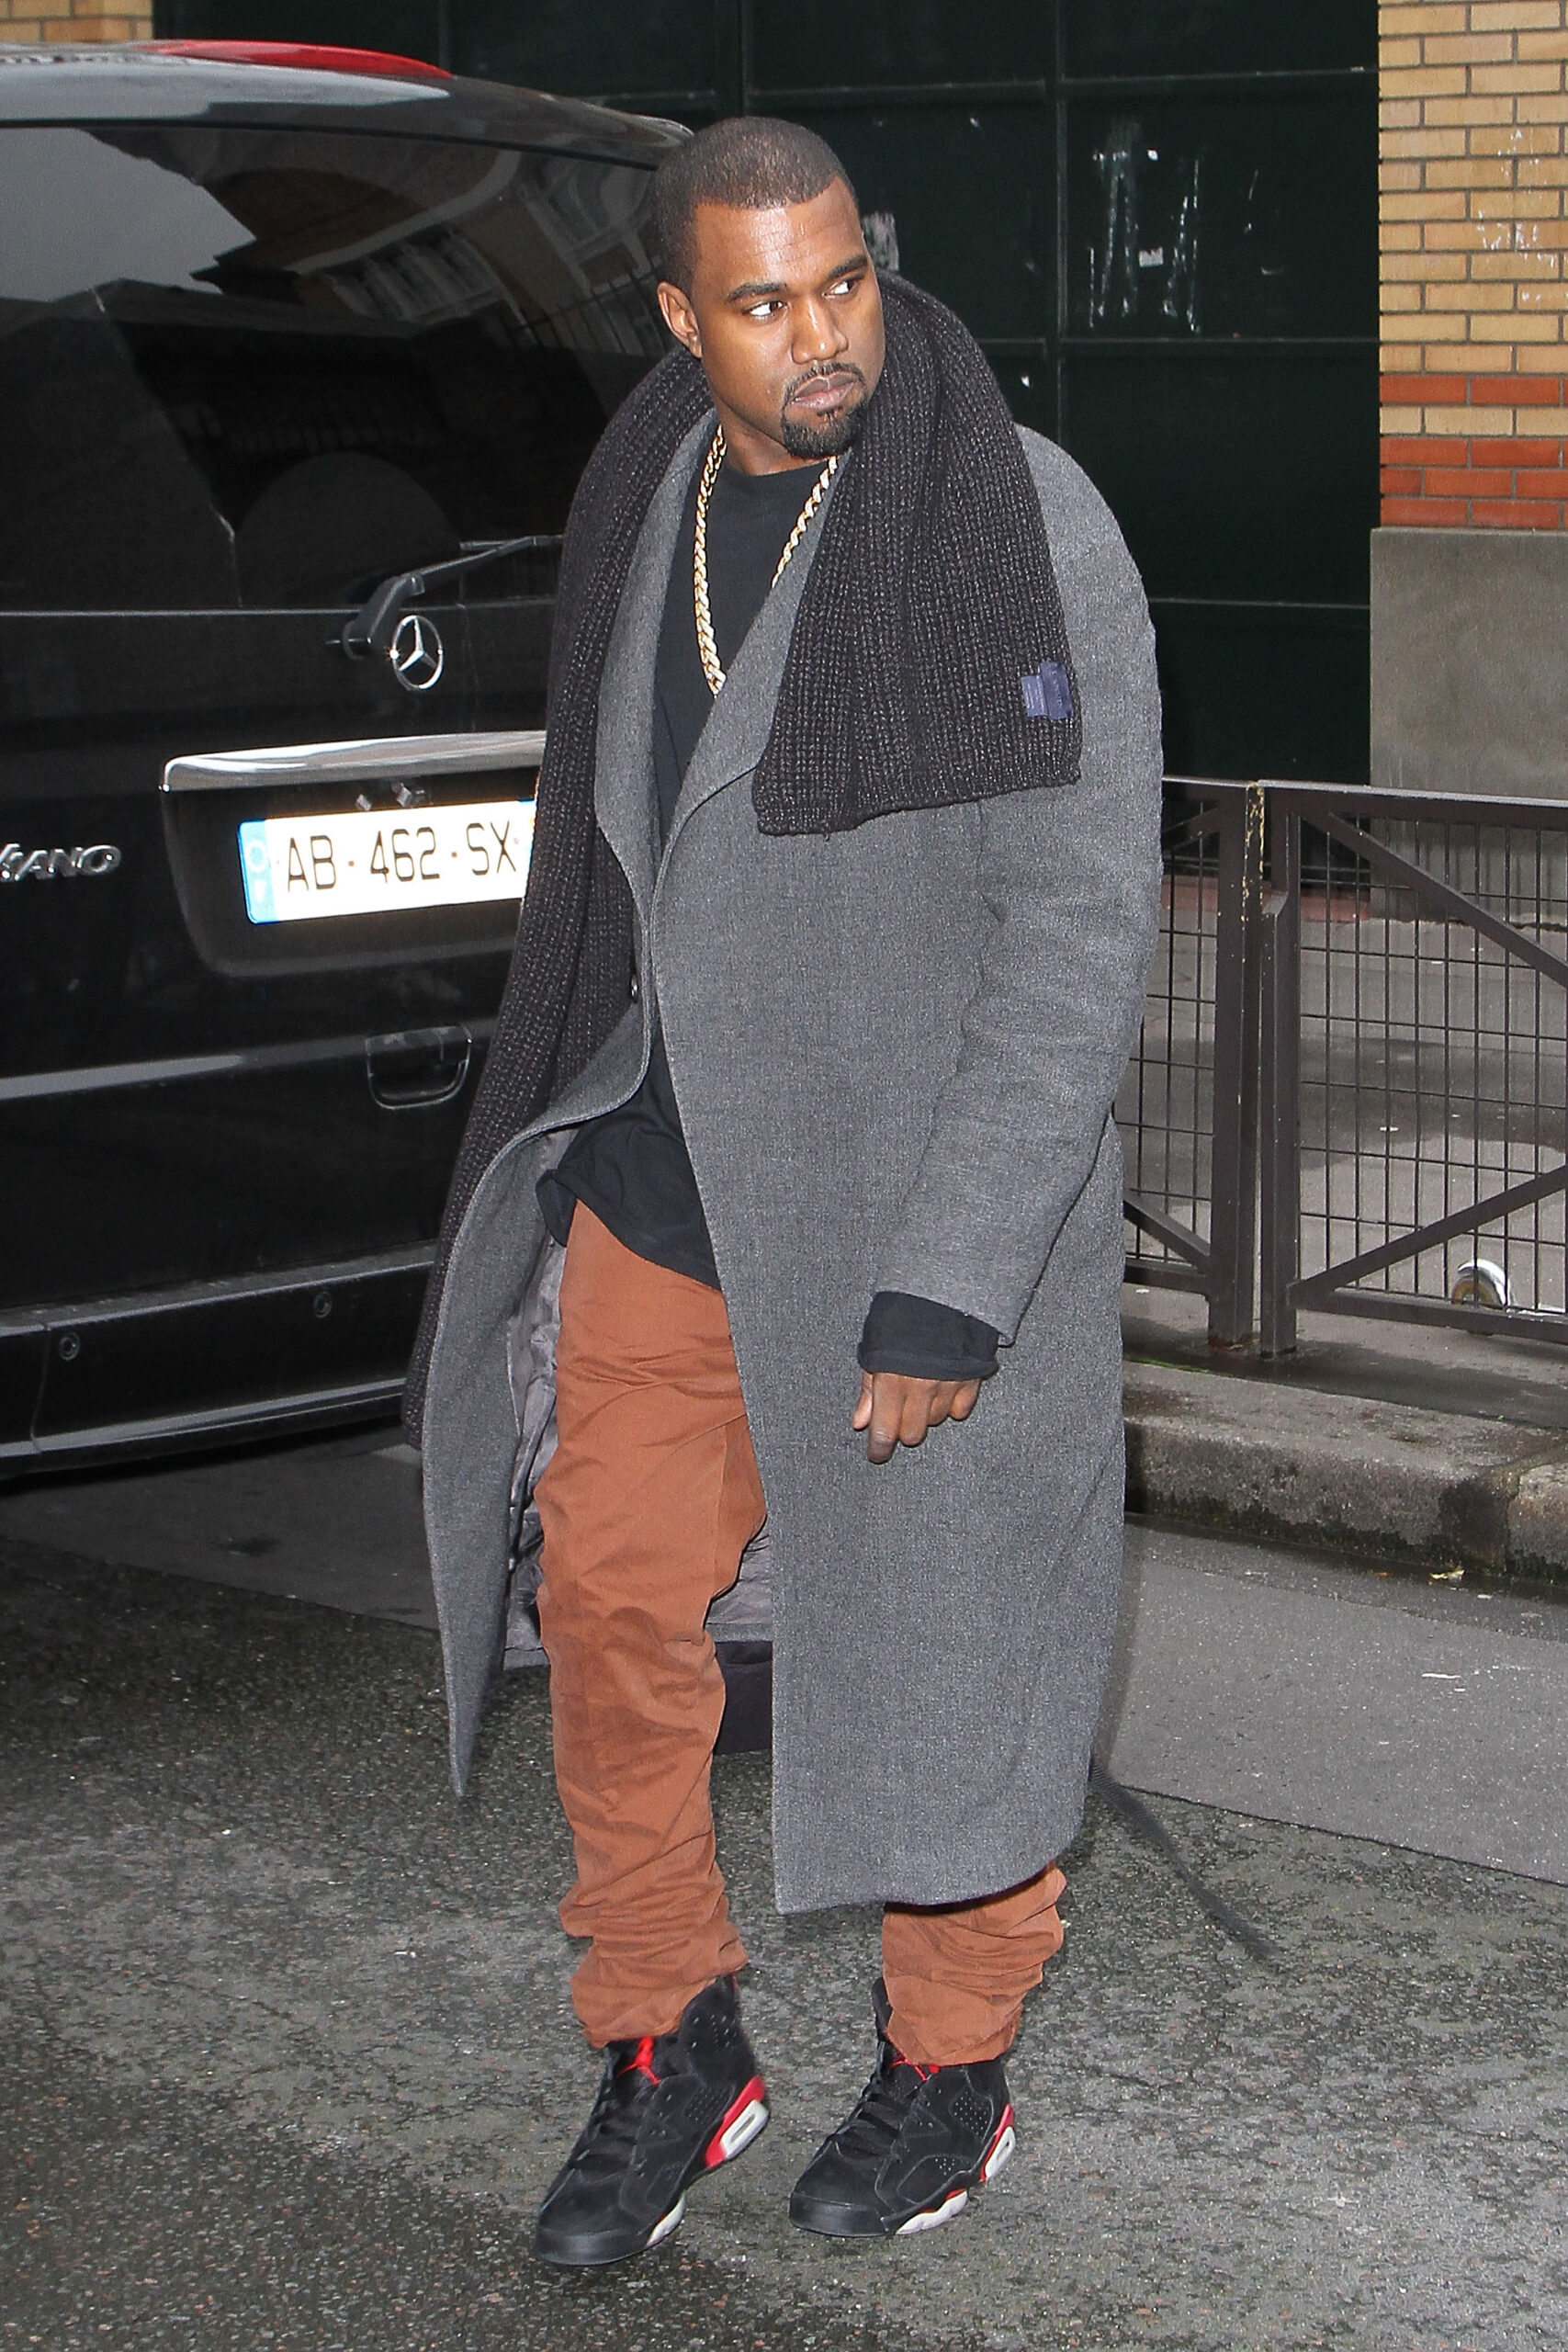 Kanye West In The Air Retro 6 "Infrared" -